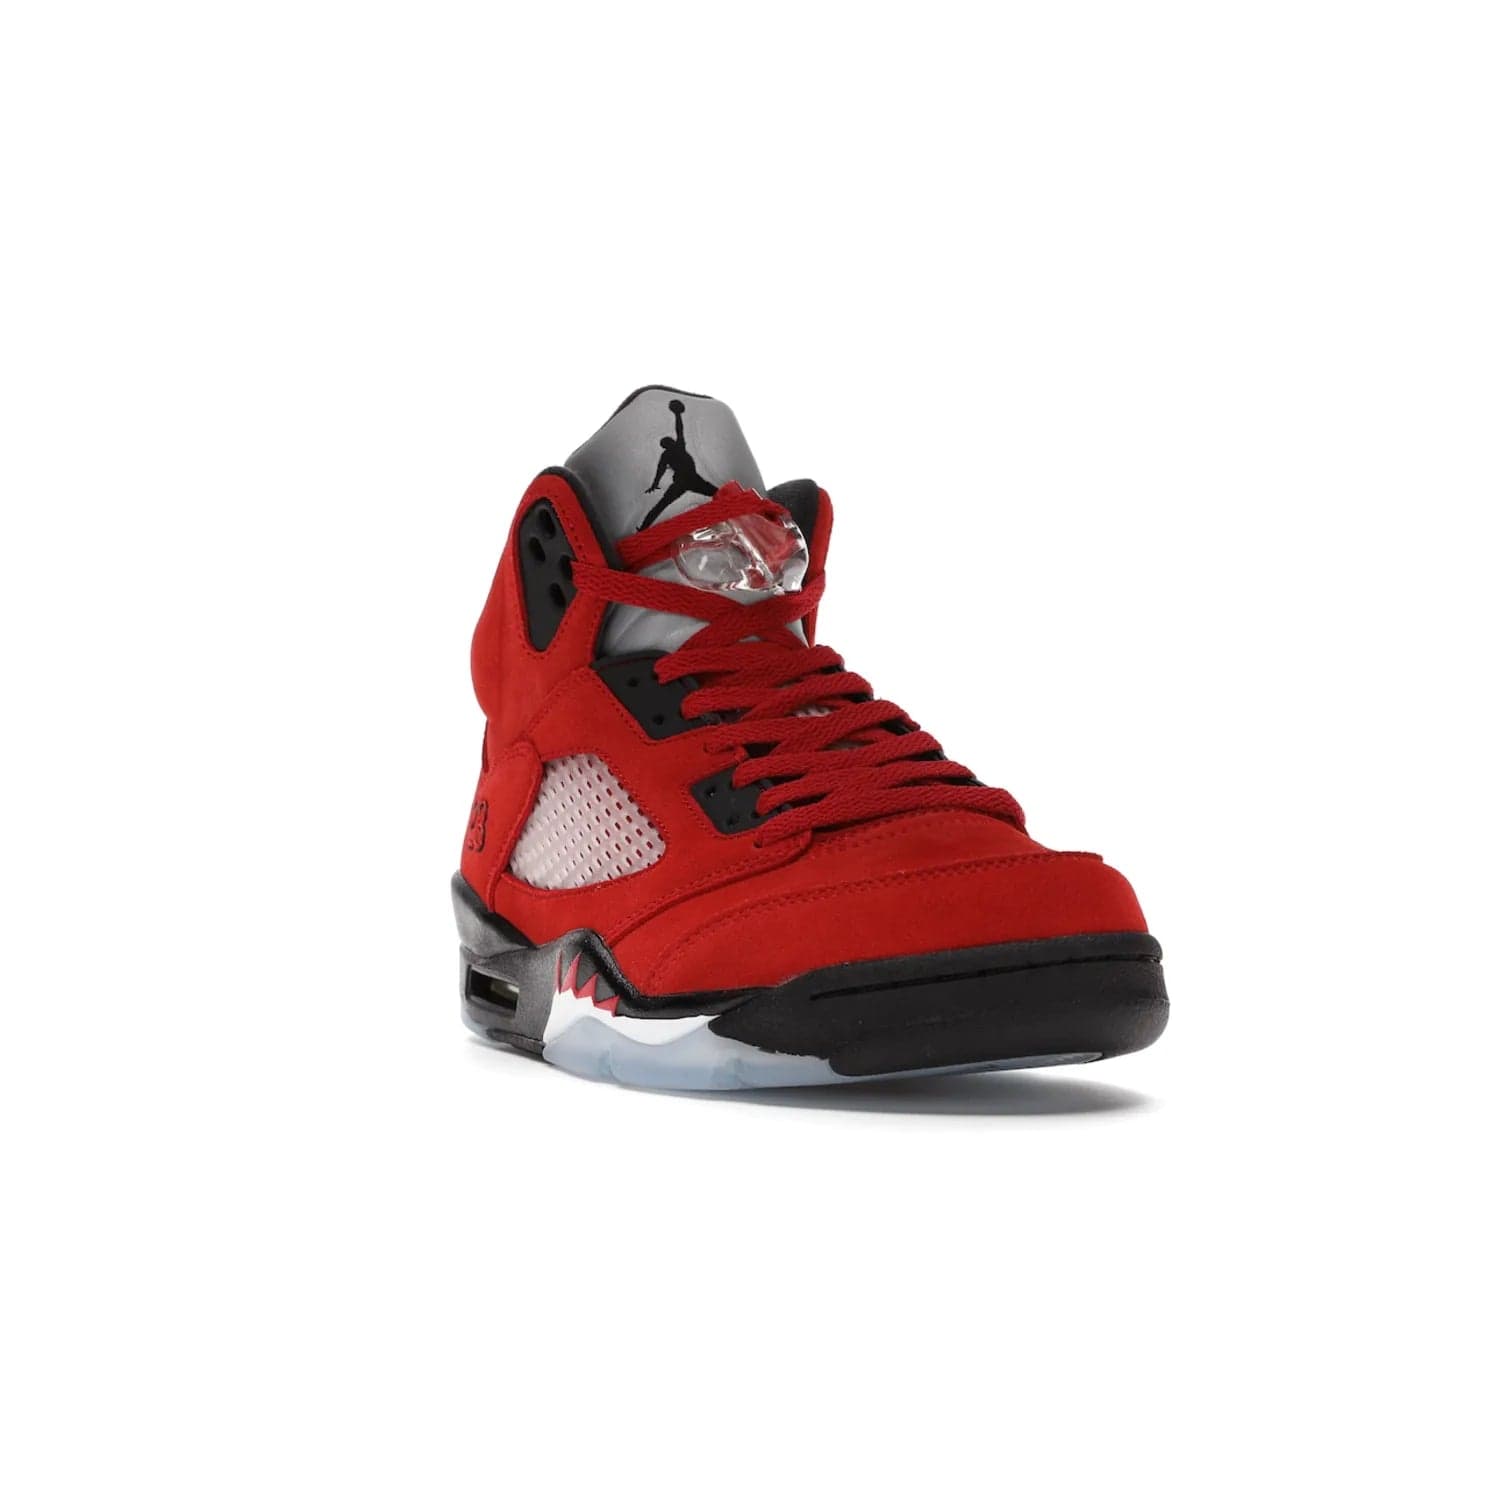 Jordan 5 Retro Raging Bull Red (2021) - Image 7 - Only at www.BallersClubKickz.com - Get ready for the 2021 stand-alone release of the Air Jordan 5 Raging Bulls! This all-suede upper combines luxe details like a Jumpman logo, red & black "23" embroidery and shark tooth detailing, atop a black midsole. Don't miss out - release date in April 2021 for $190.